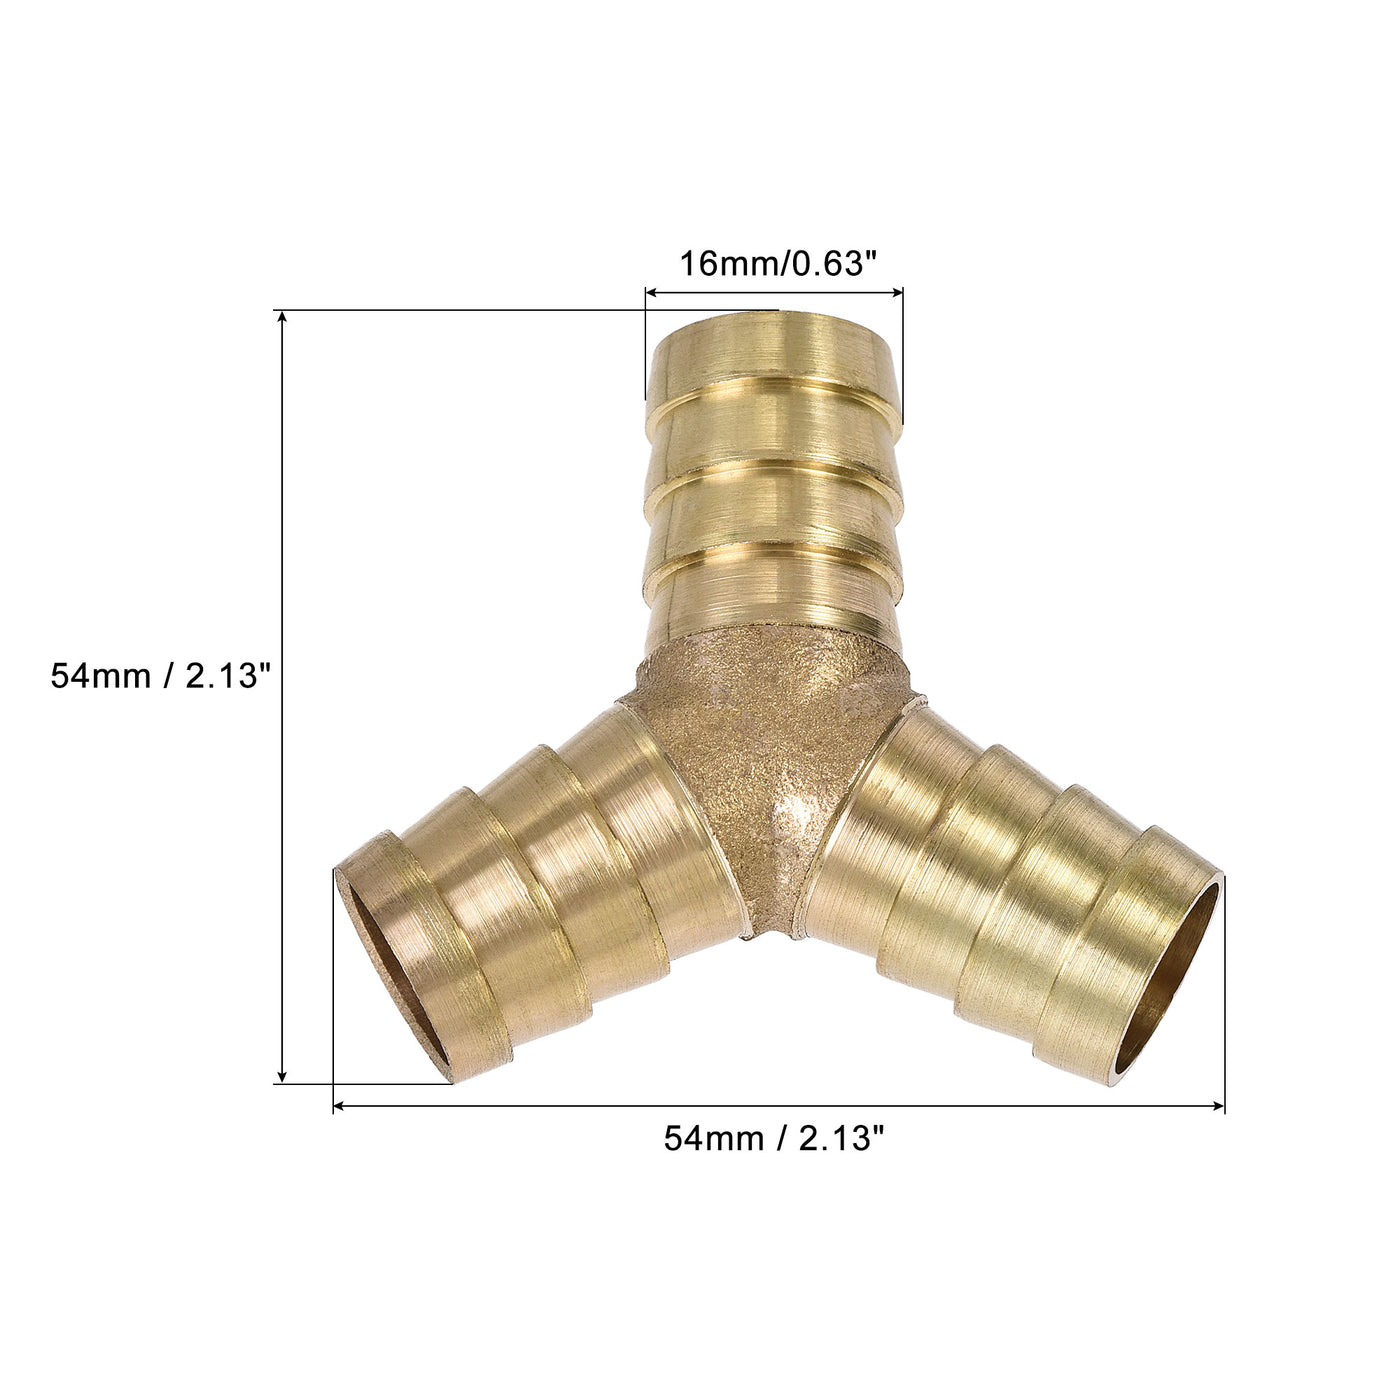 Uxcell Uxcell Barb Hose Fitting 10mm OD Y Shape Pipe Connector Brass 2Pcs with 6Pcs 6-12mm Hose Clamps for Water Fuel Air